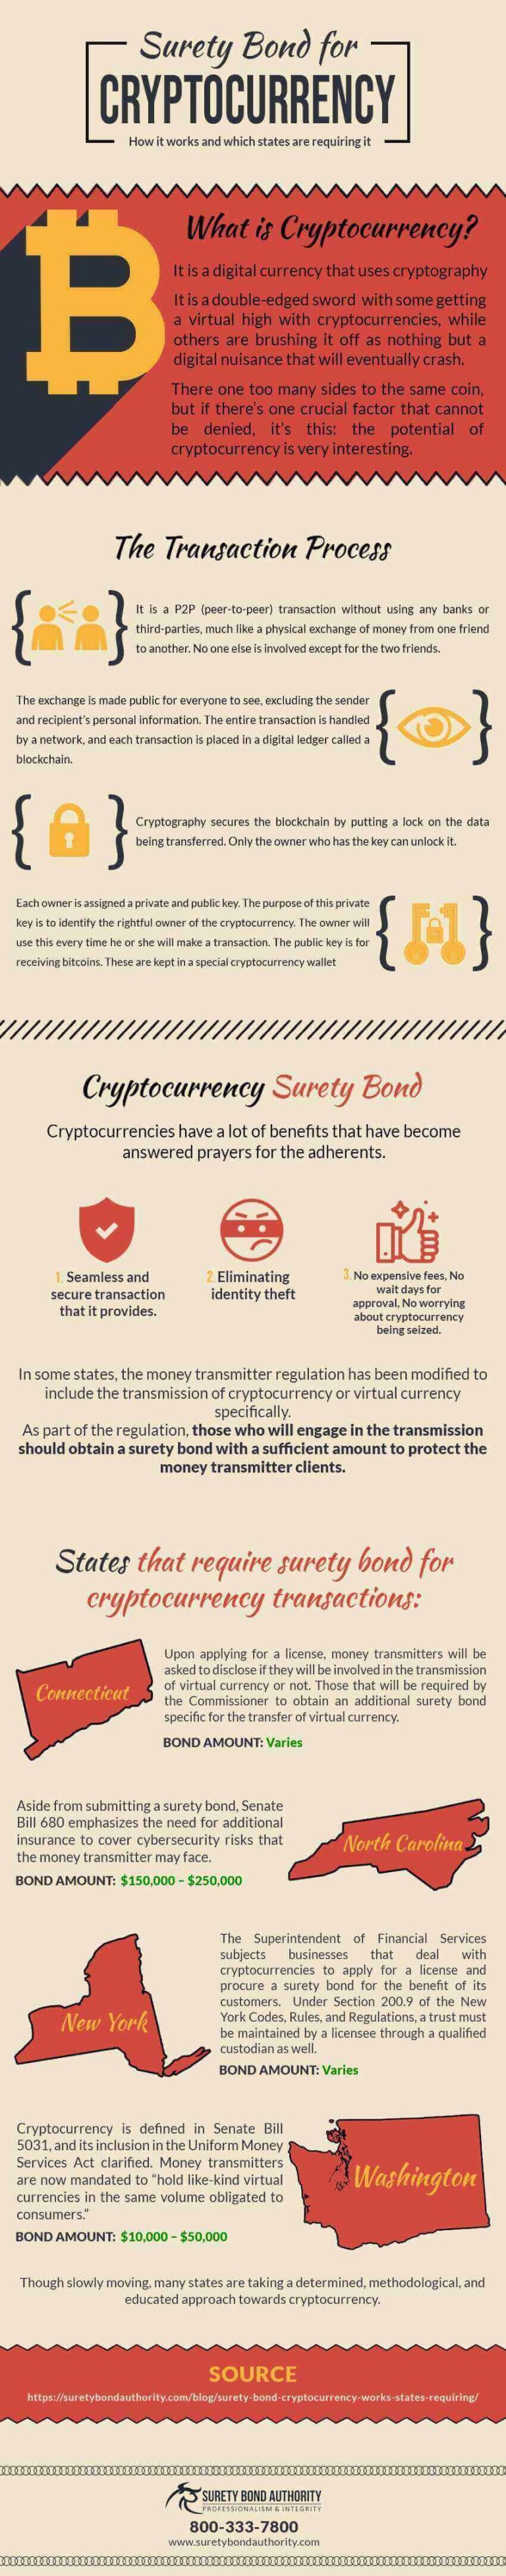 Surety Bond for Cryptocurrency Infographic